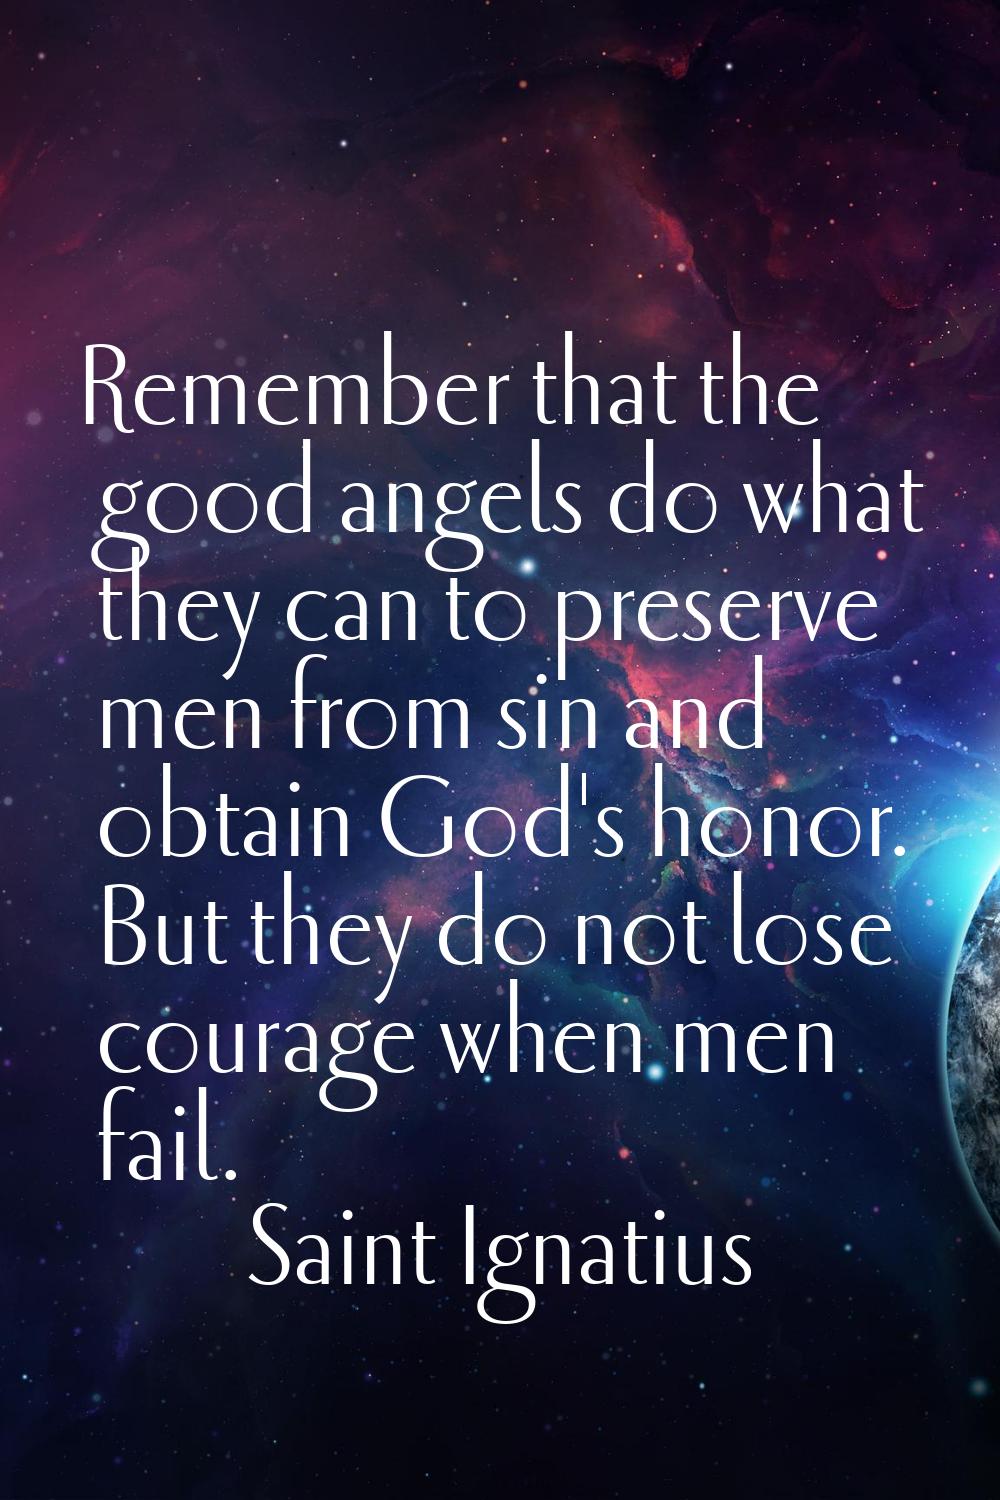 Remember that the good angels do what they can to preserve men from sin and obtain God's honor. But